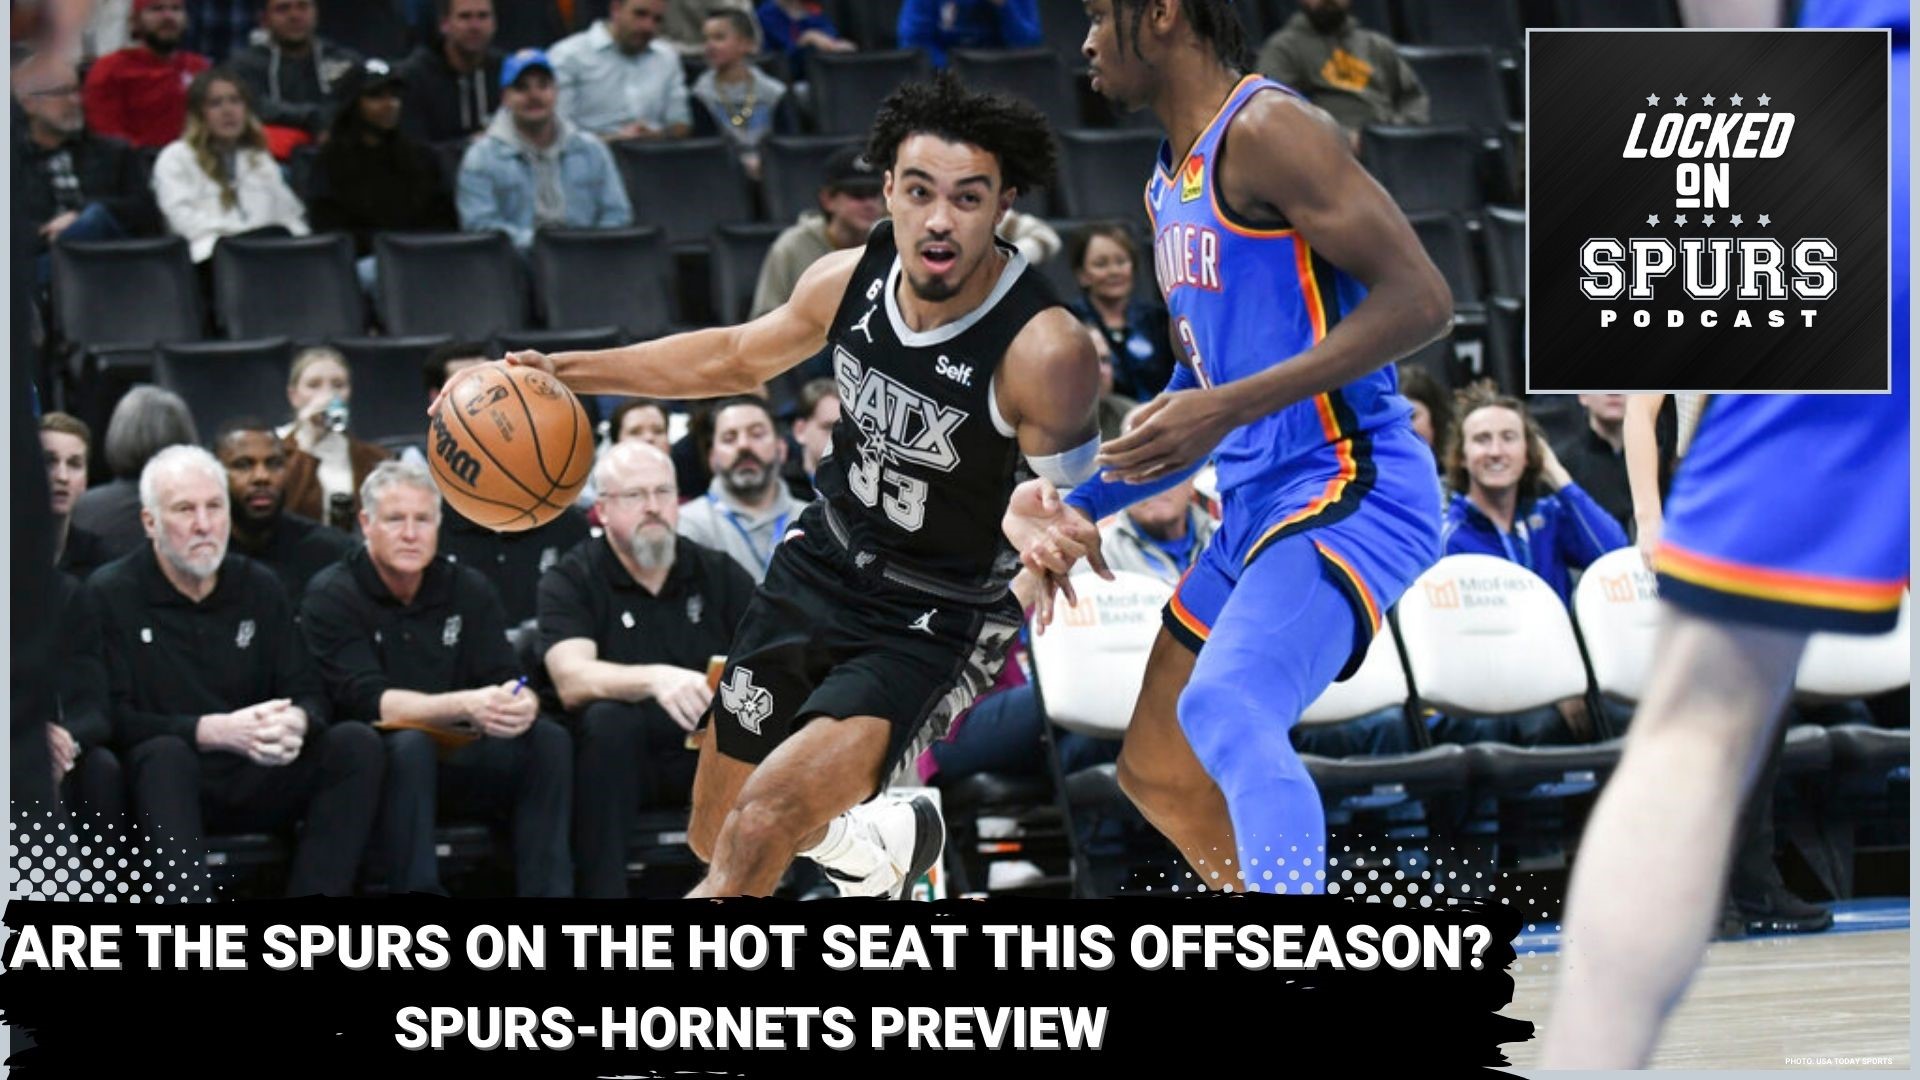 The Spurs are primed to make a splash in the offseason.